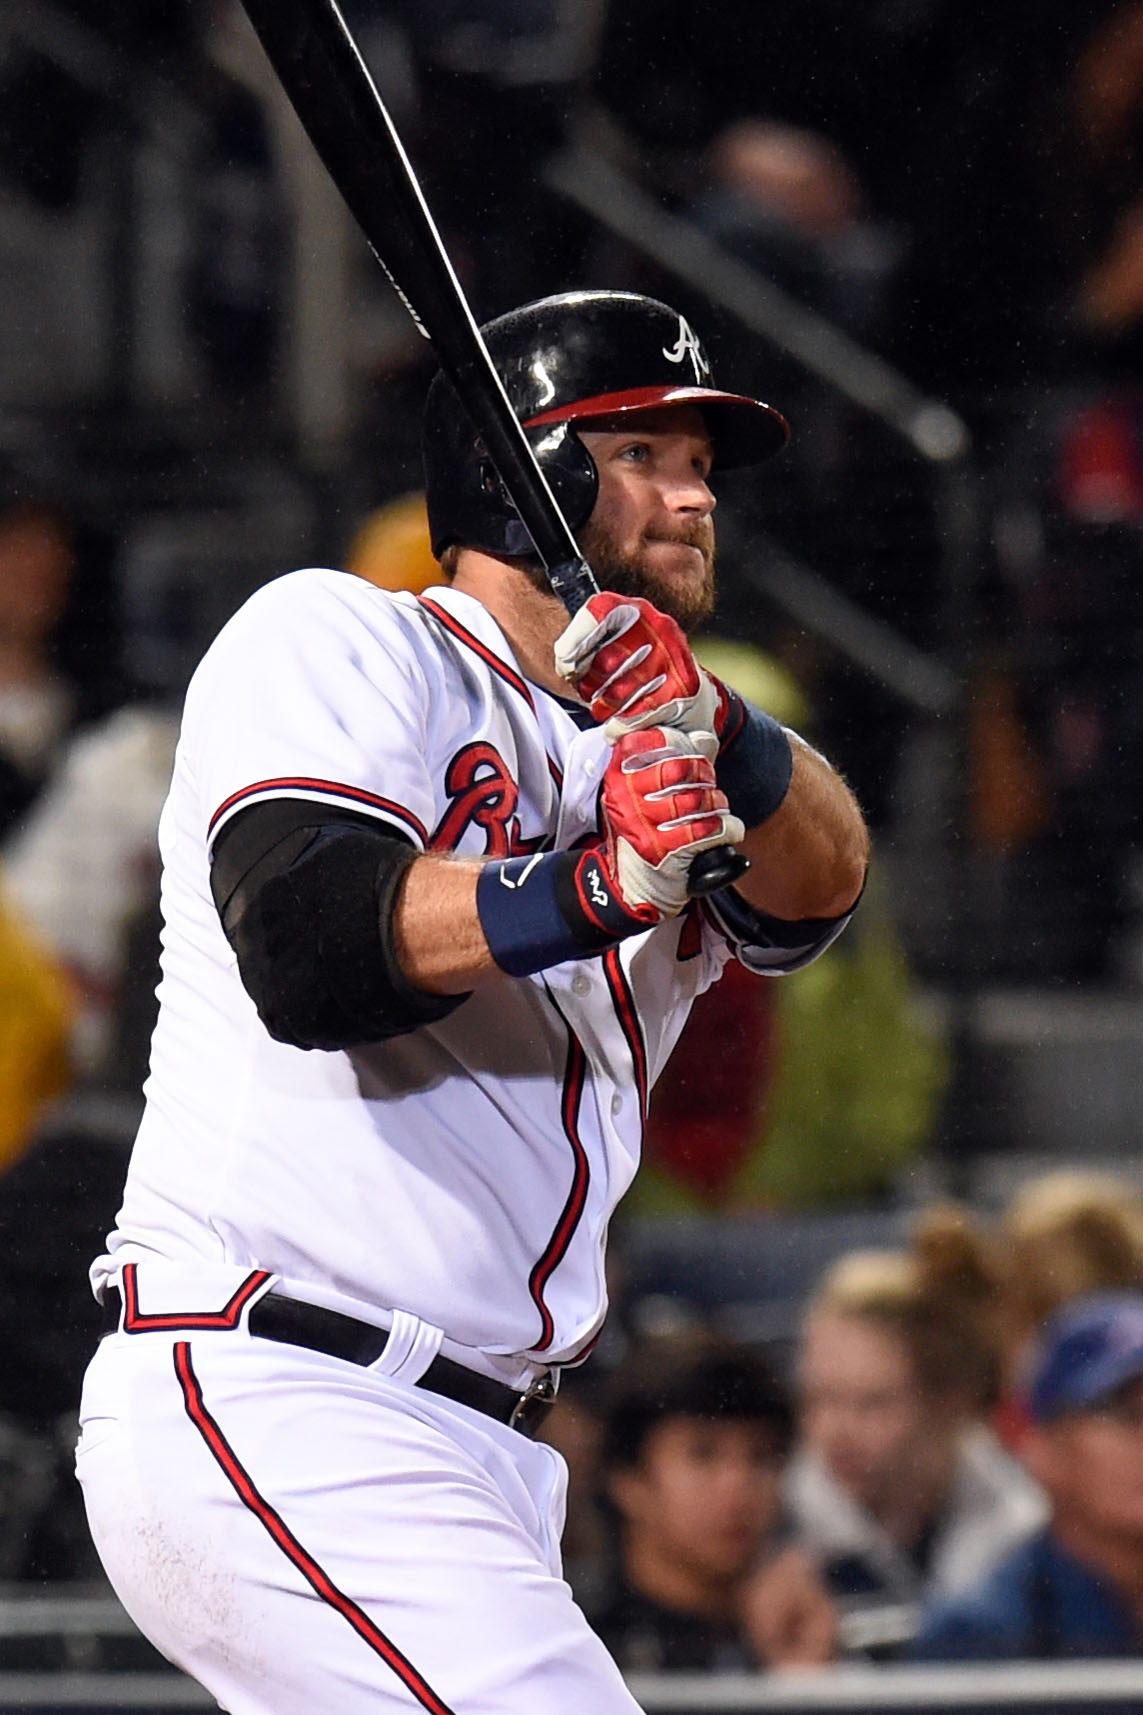 Reports: Braves re-sign veteran catcher A.J. Pierzynski to one-year deal